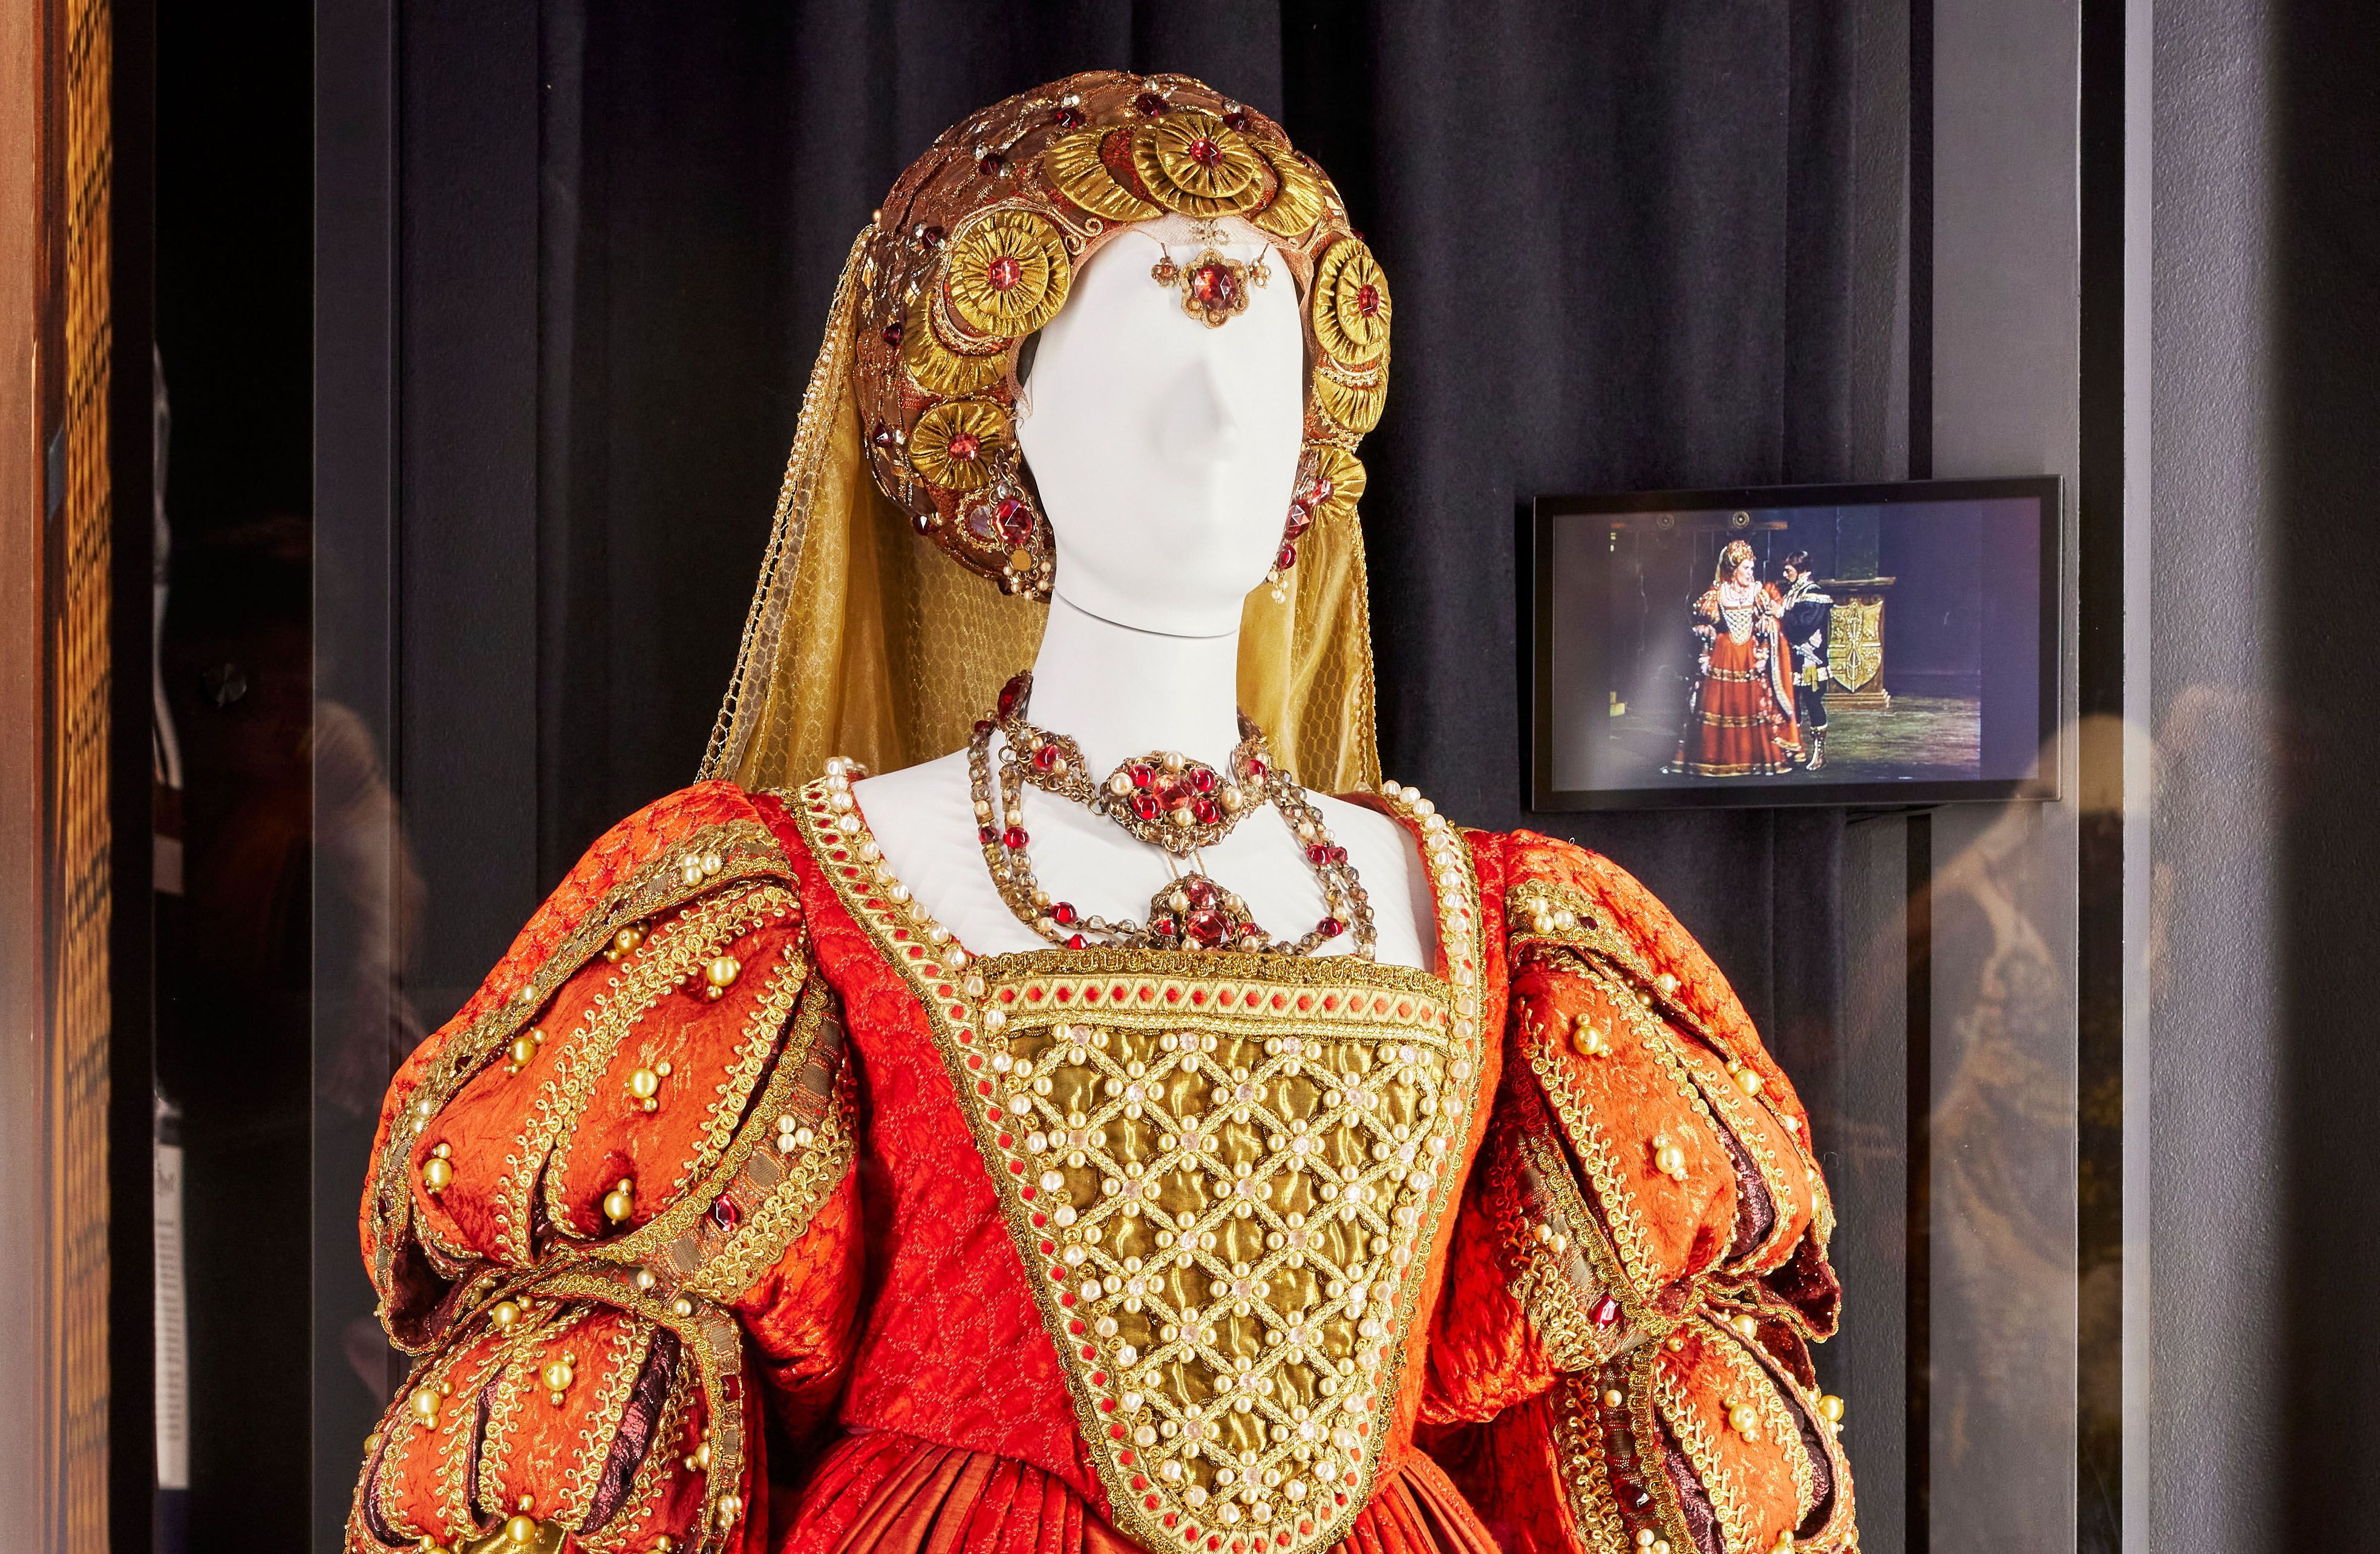 A mannequin dressed in an elaborate Renaissance-style stage costume stands in a large Perspex-fronted display case . On the rear wall a small screen is showing a scene from the opera Lucrezia Borgia where Dame Joan Sutherland is wearing the same costume. 